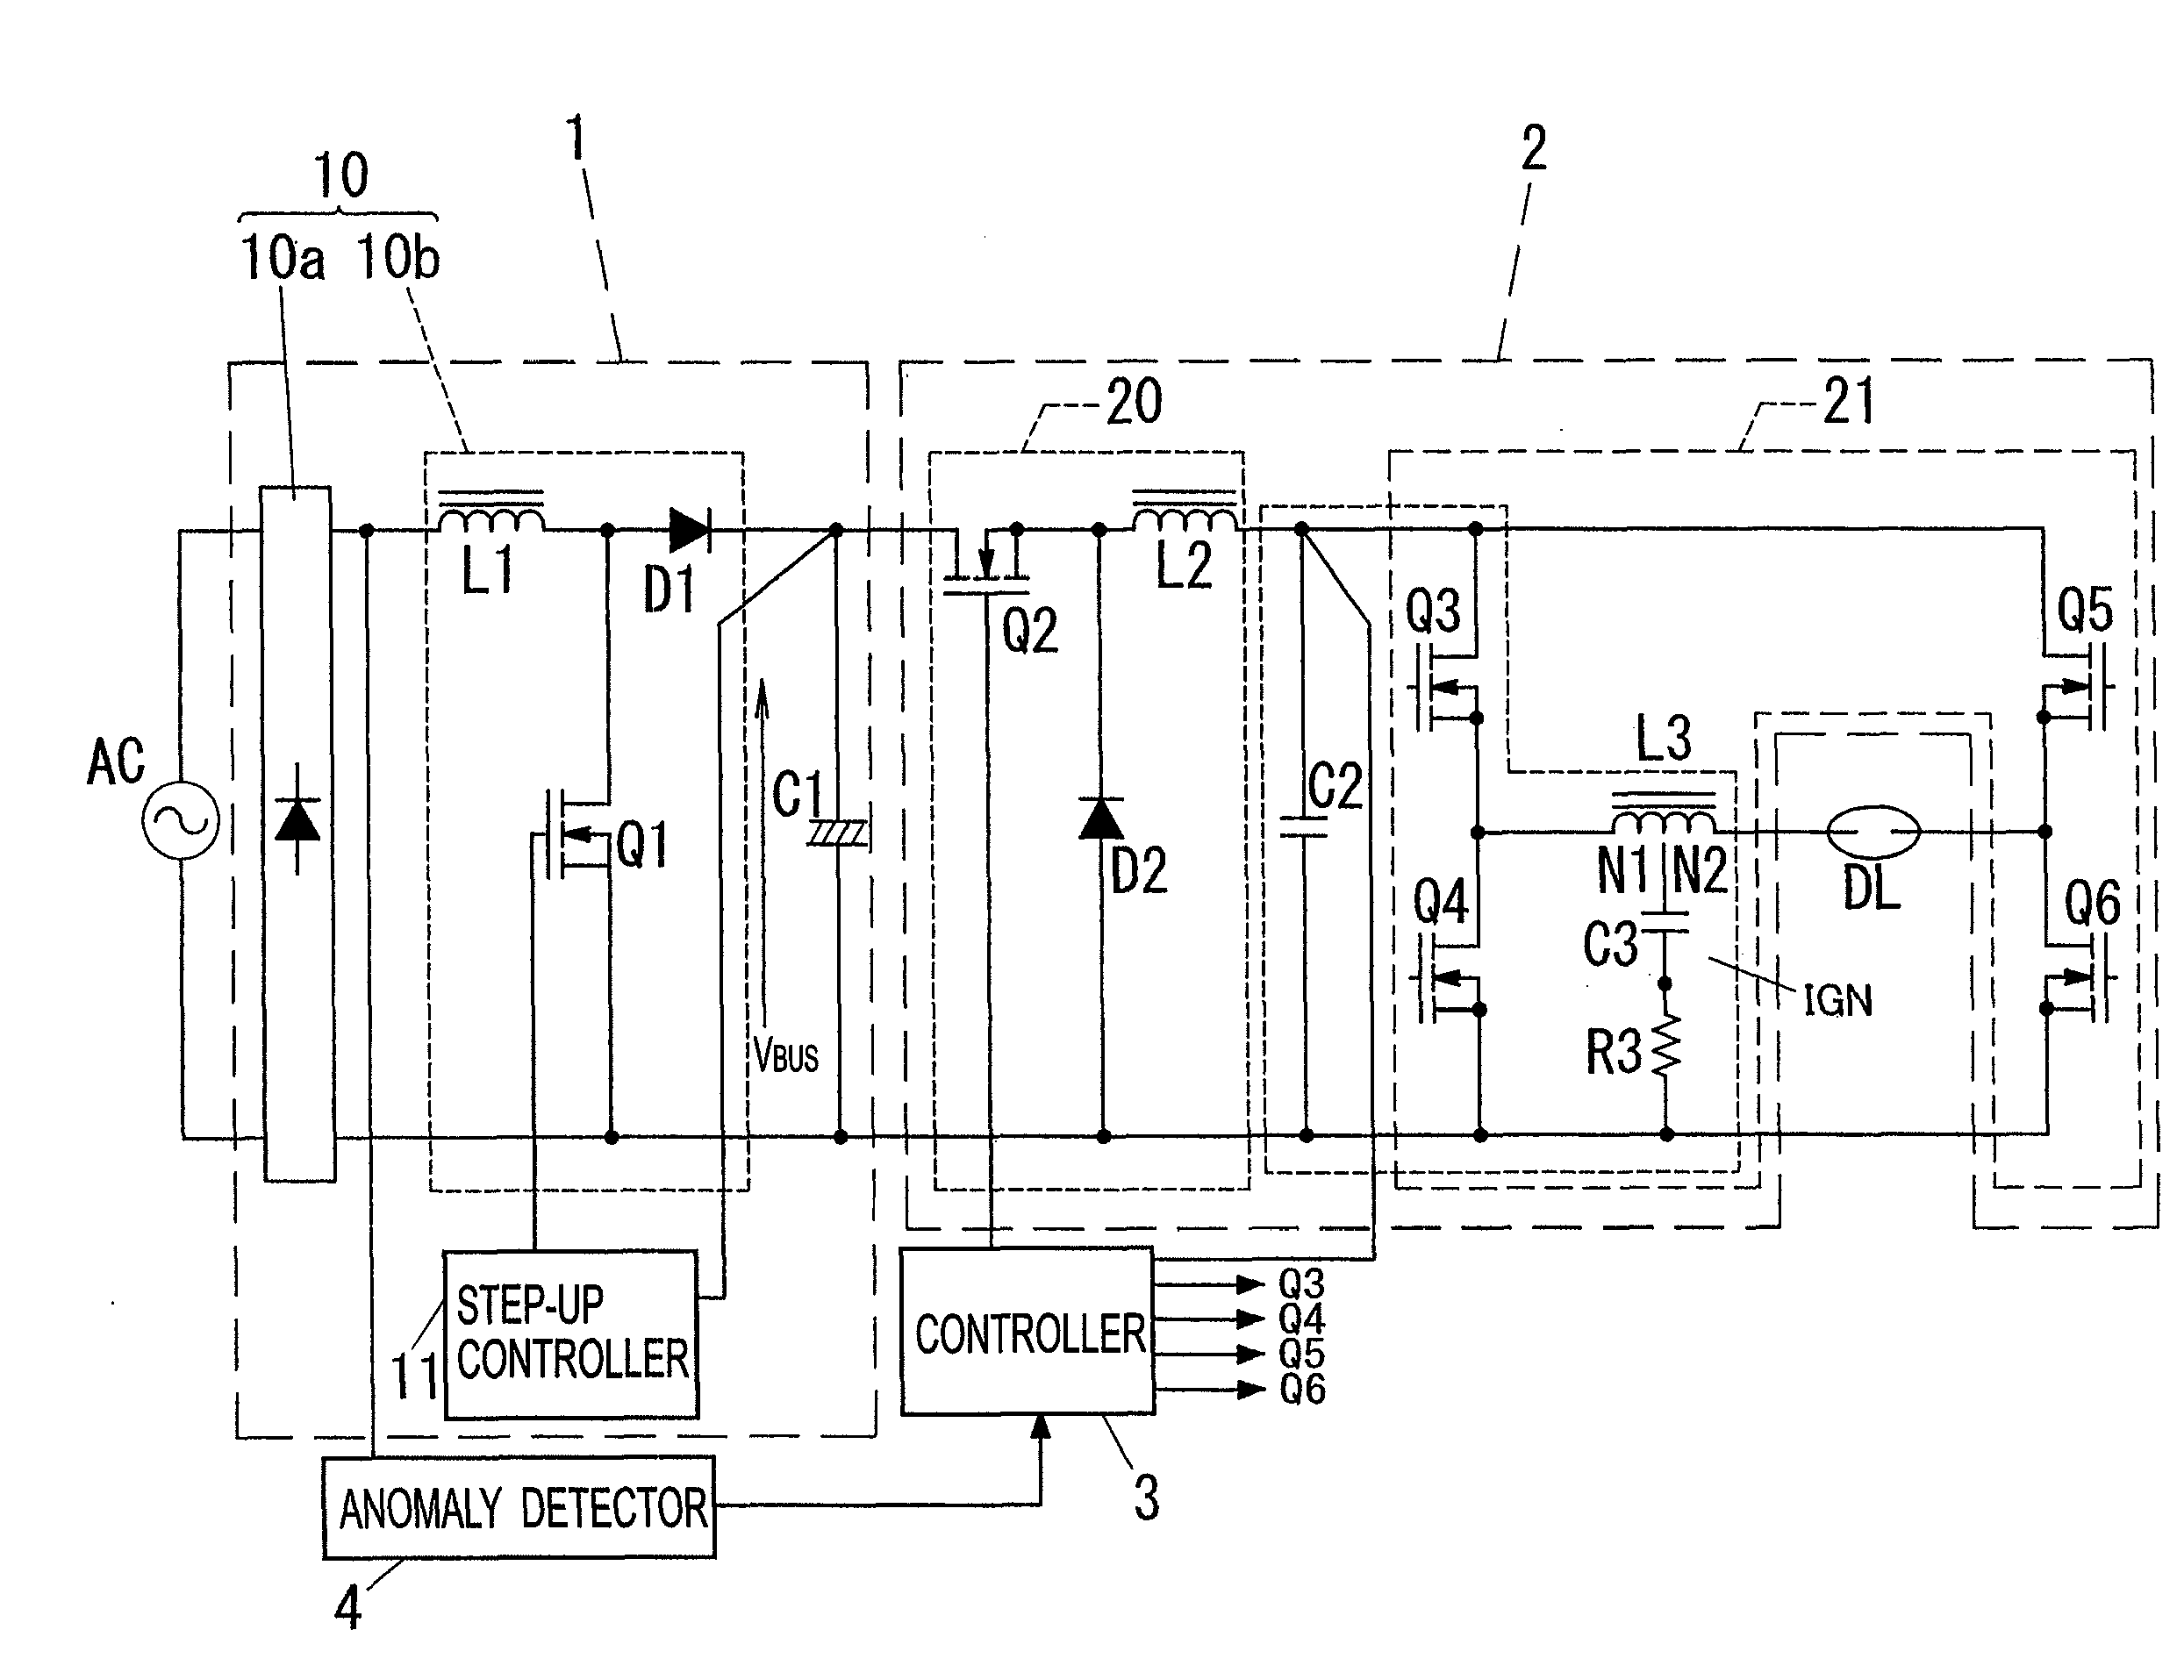 High-voltage discharge lamp lighting device and lighting fixture